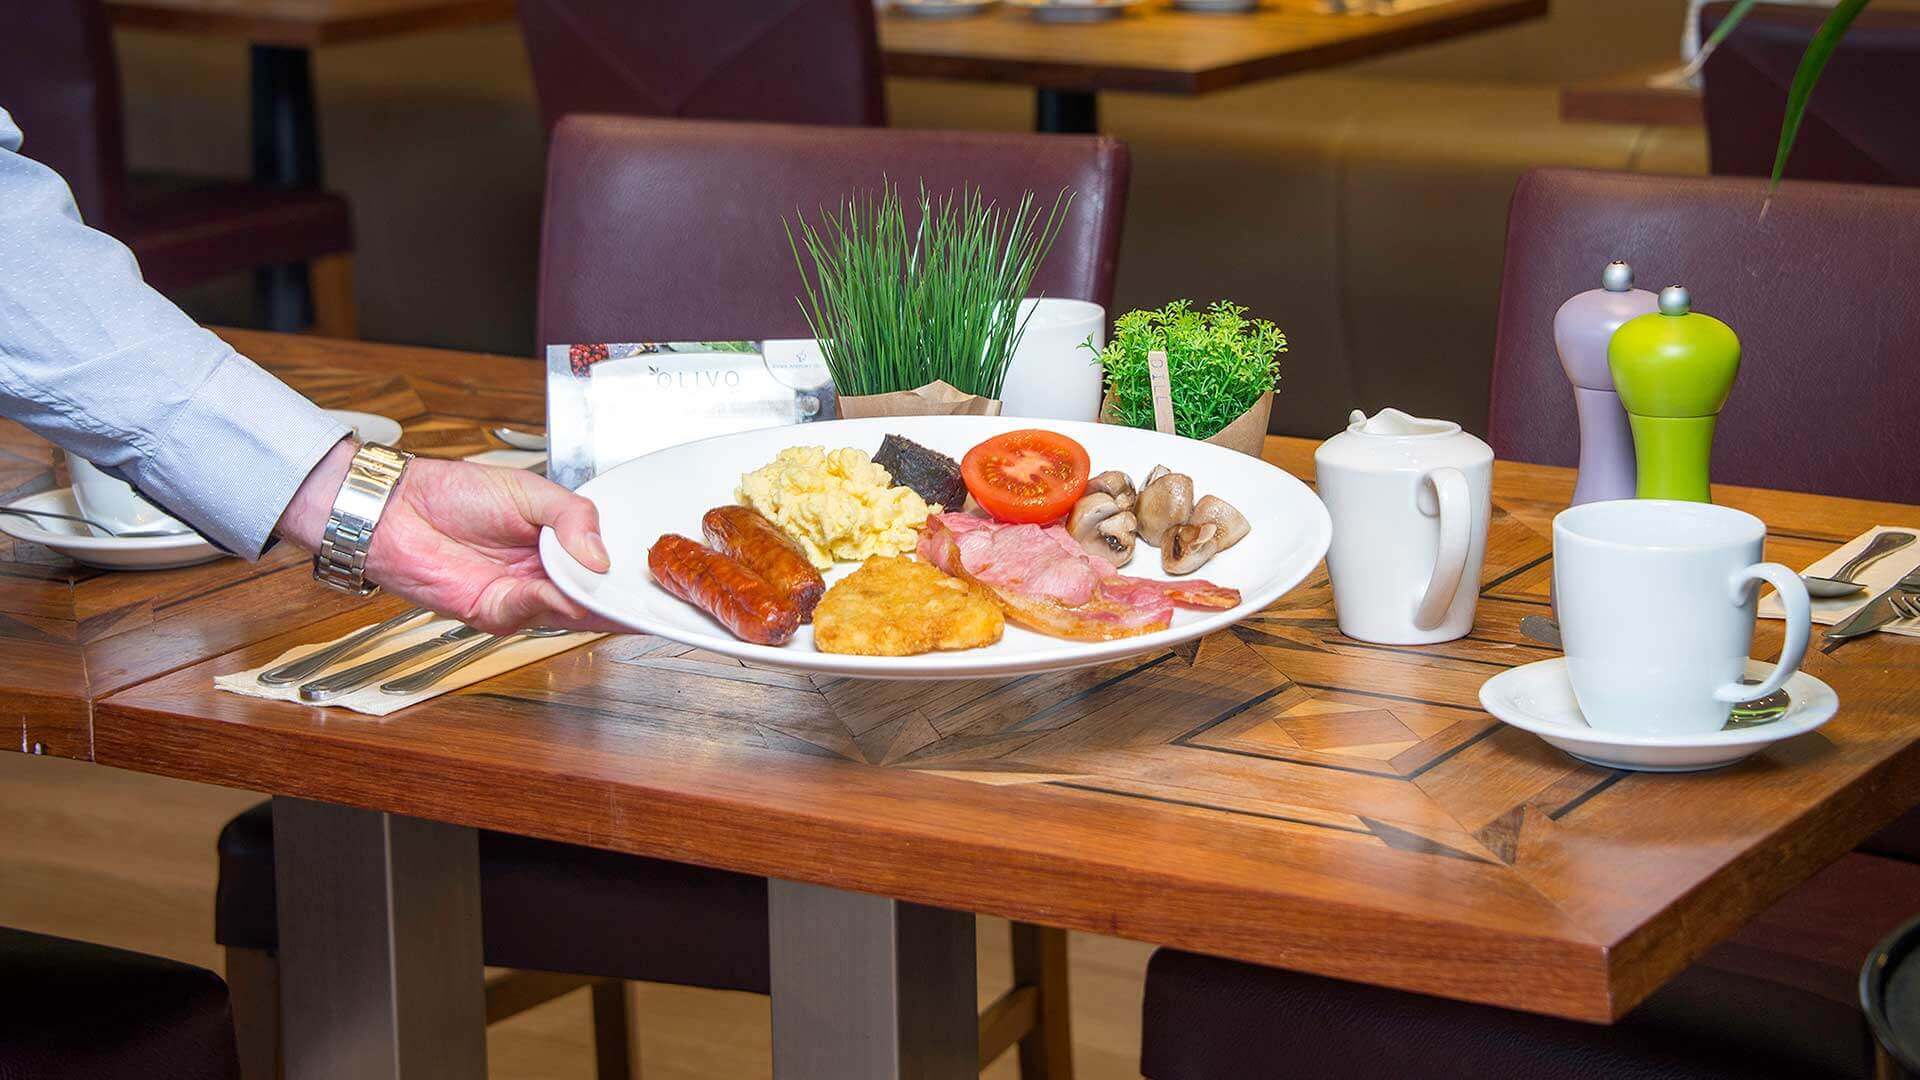 Waiter serving a full Irish breakfast at a table in the Cork Airport Hotel